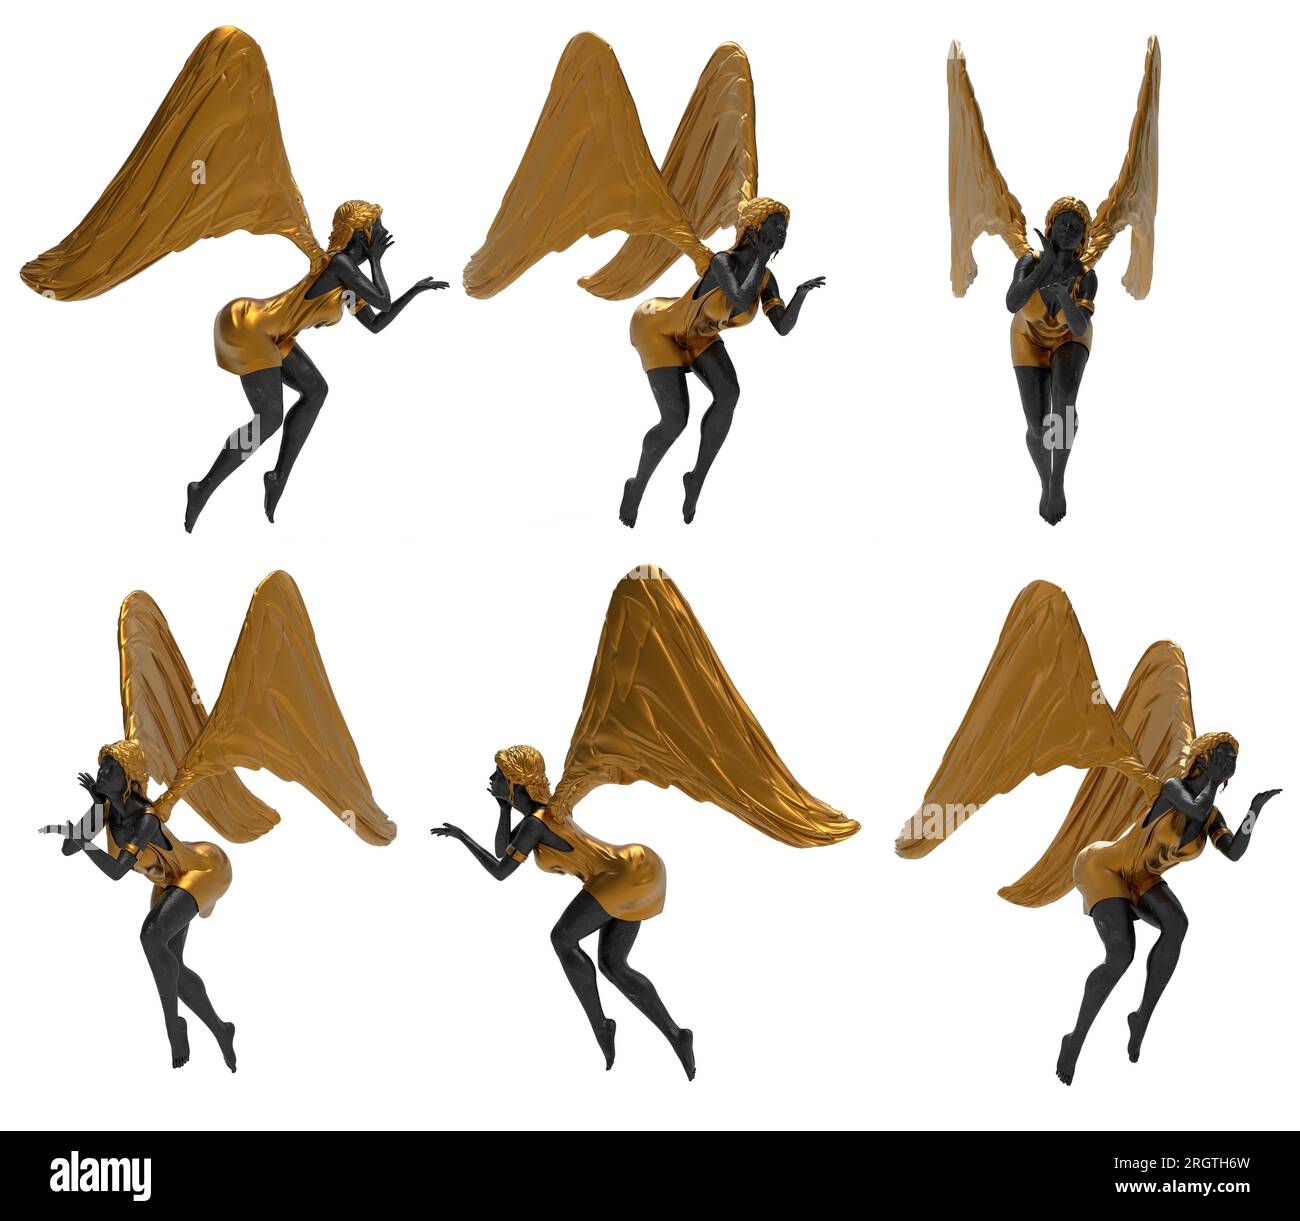 Isolated 3d render illustration of black marble and golden female guardian angel statue flying pose, various angles. Stock Photo